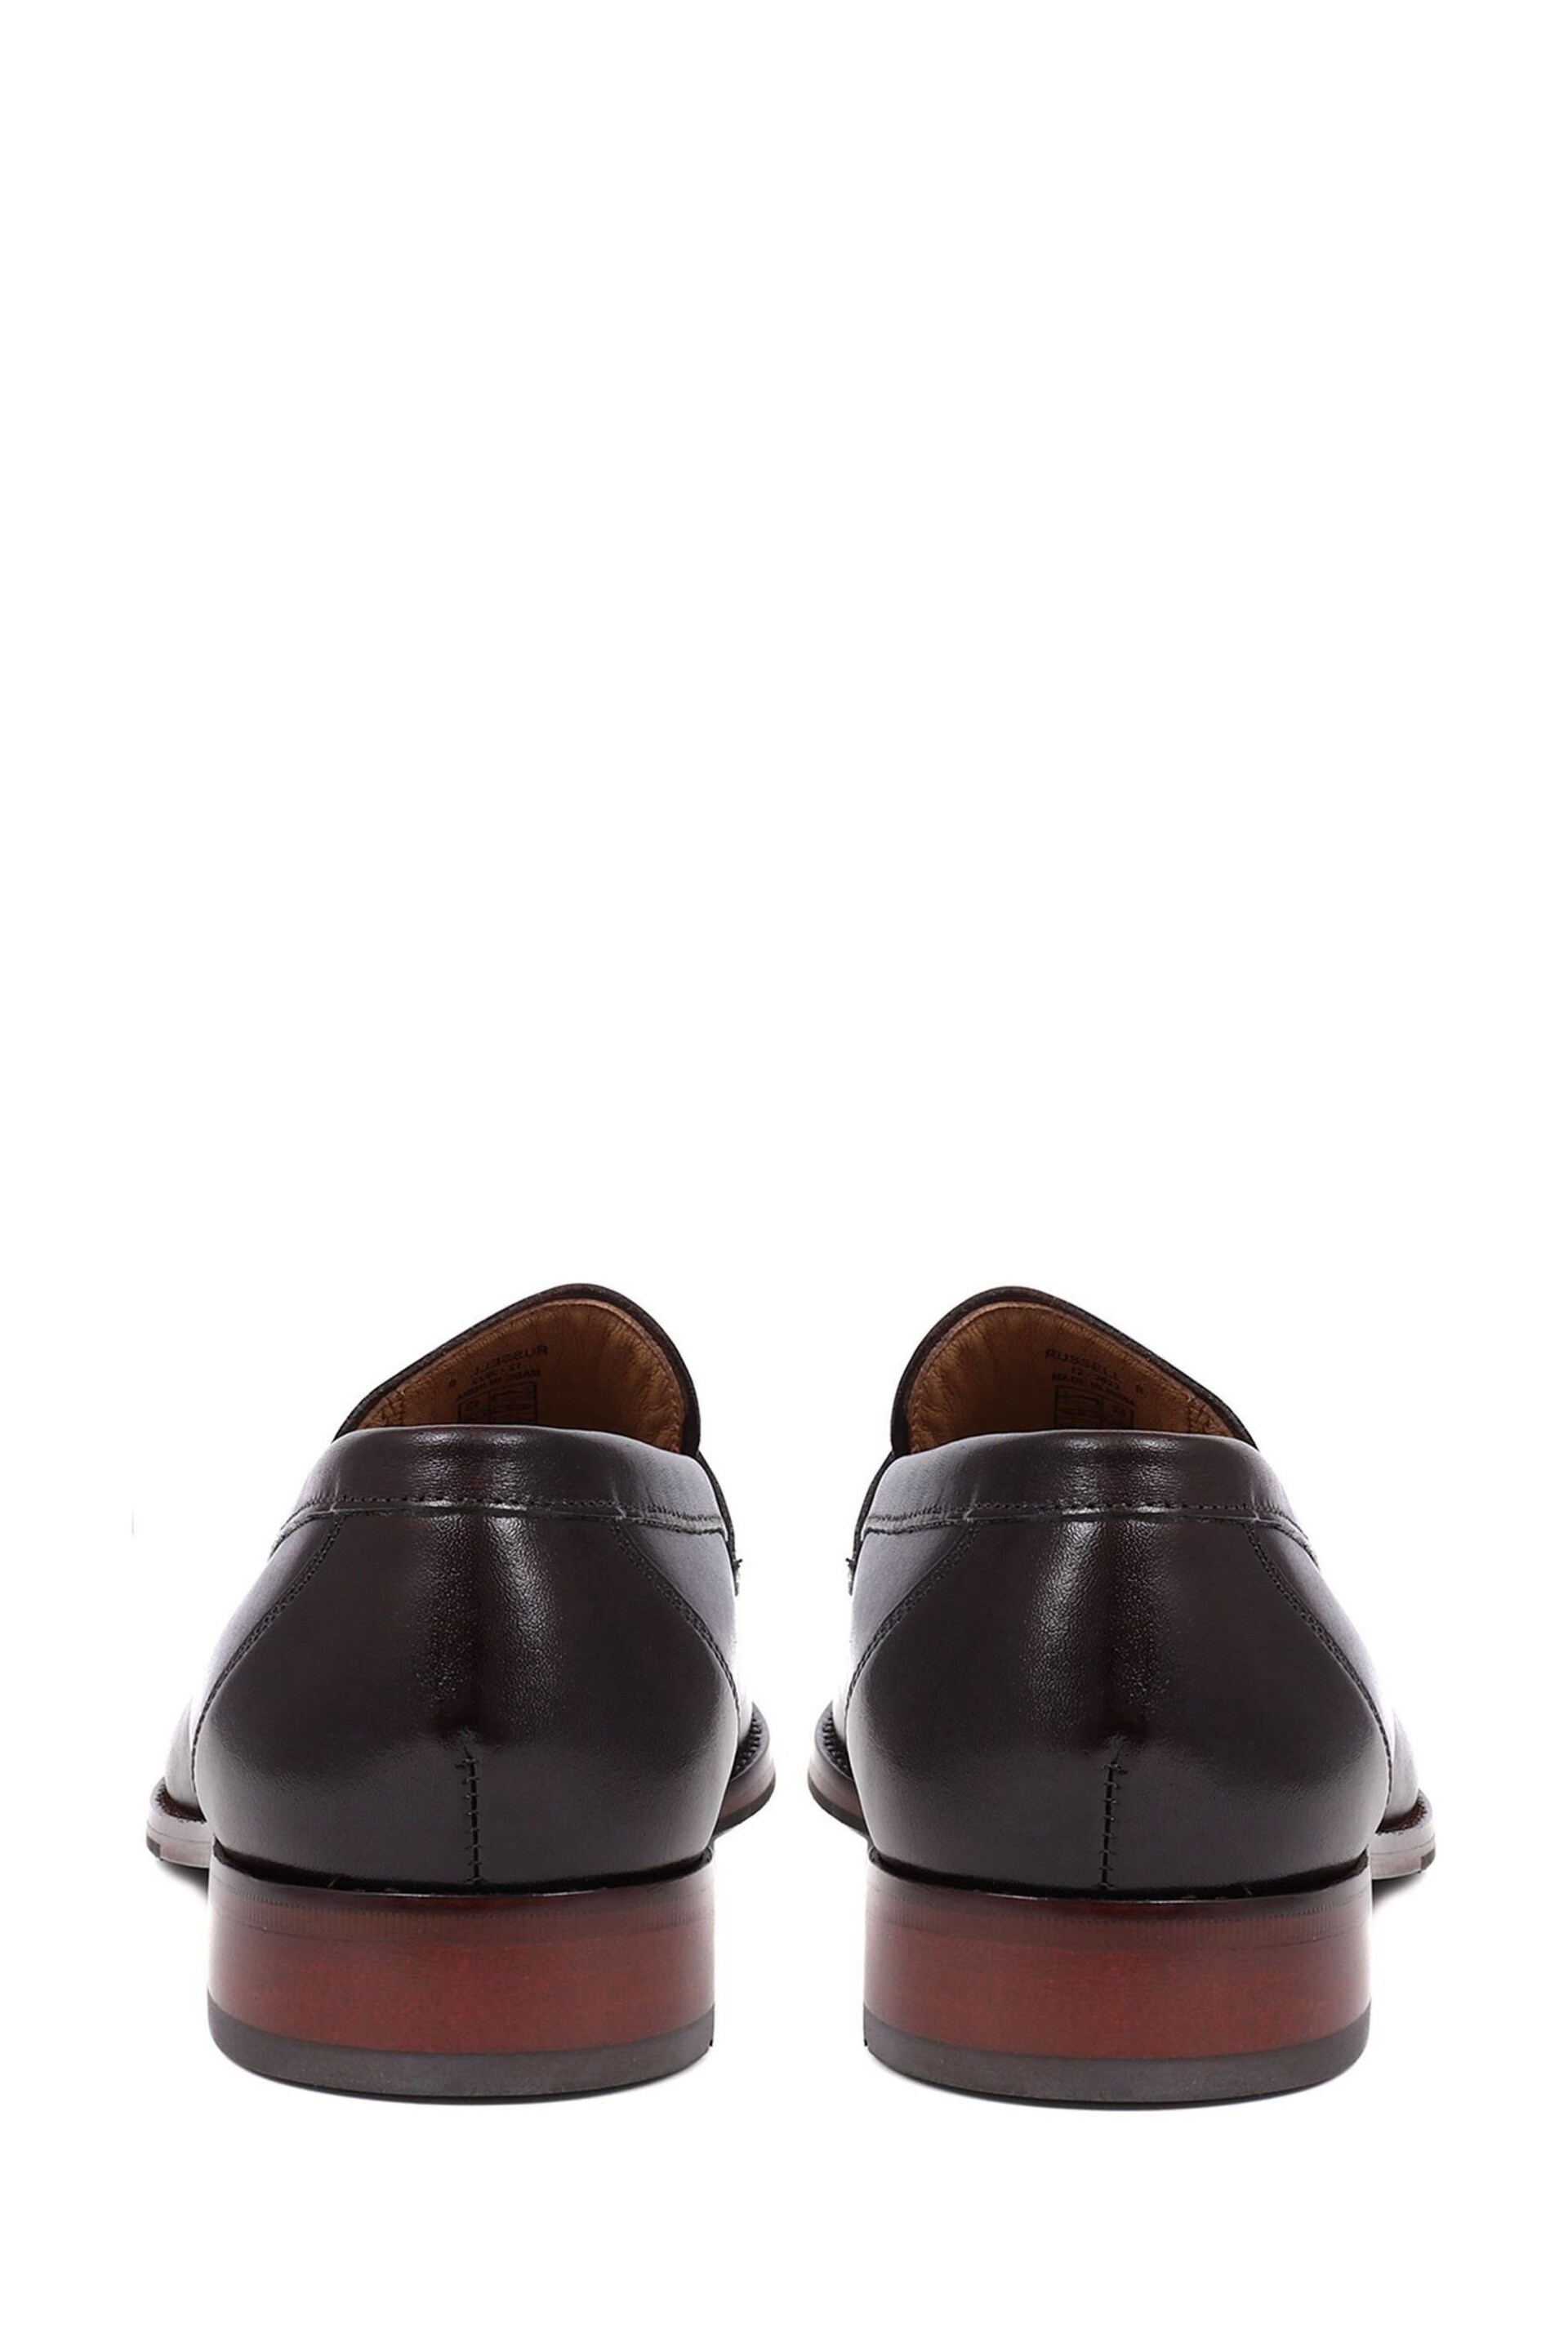 Jones Bootmaker Leather Penny Loafers - Image 4 of 5